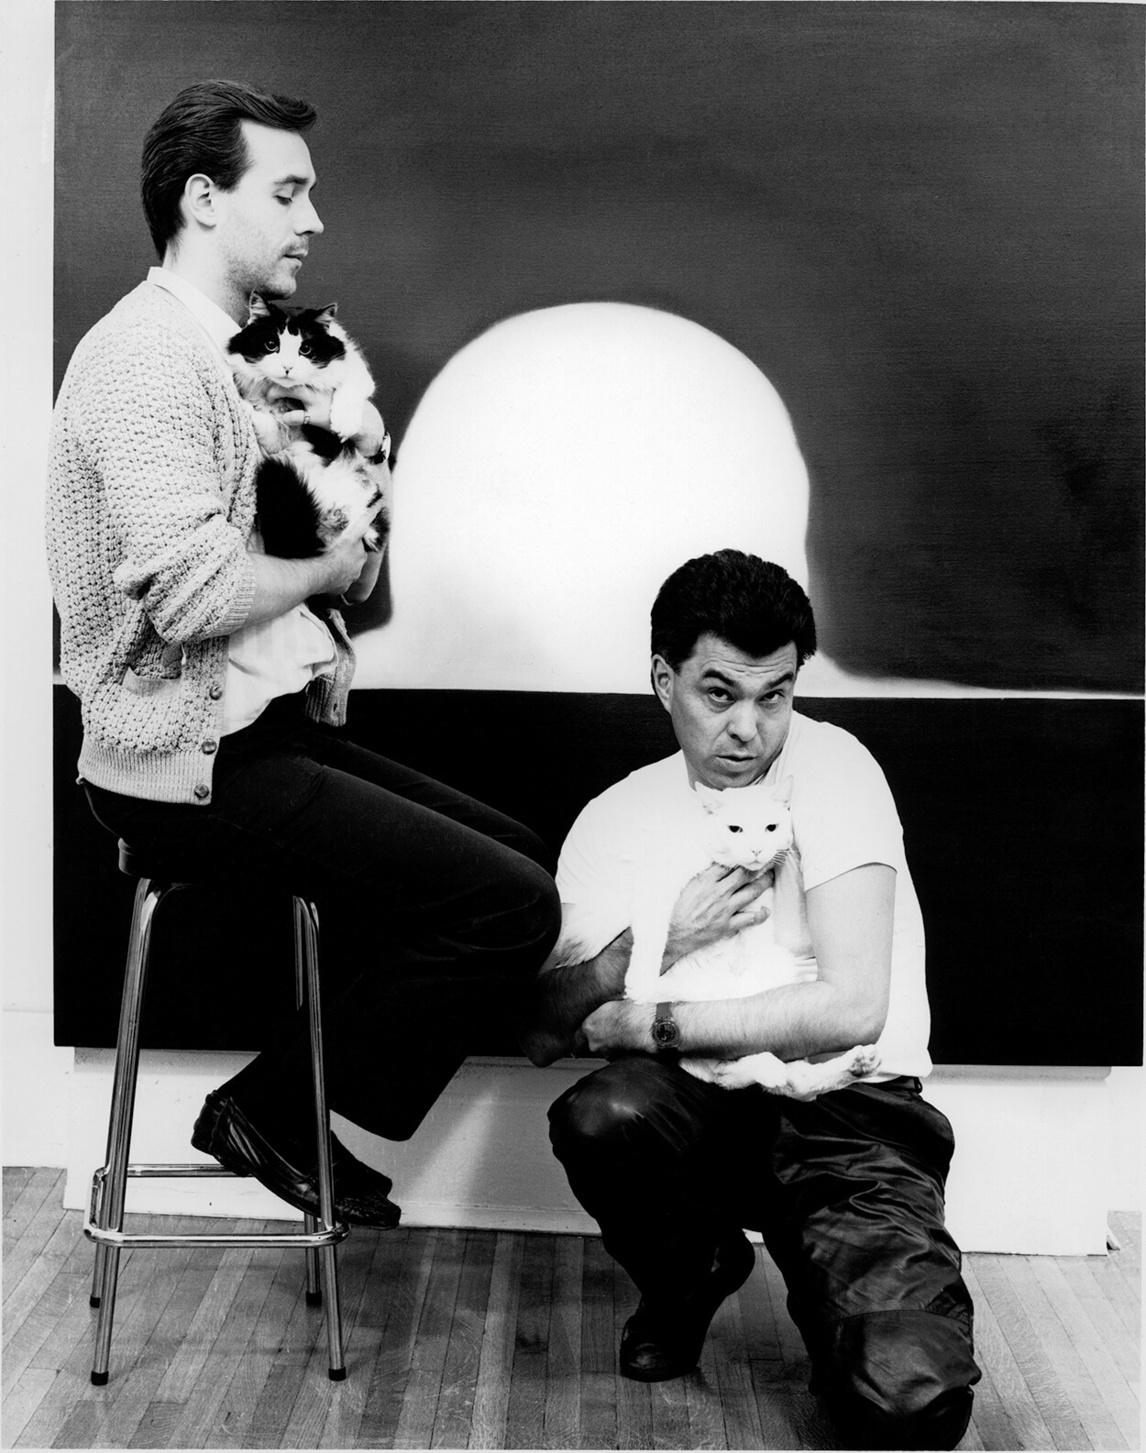 Paul Gardner and Robert Houle with their cats, Simon and Windigo